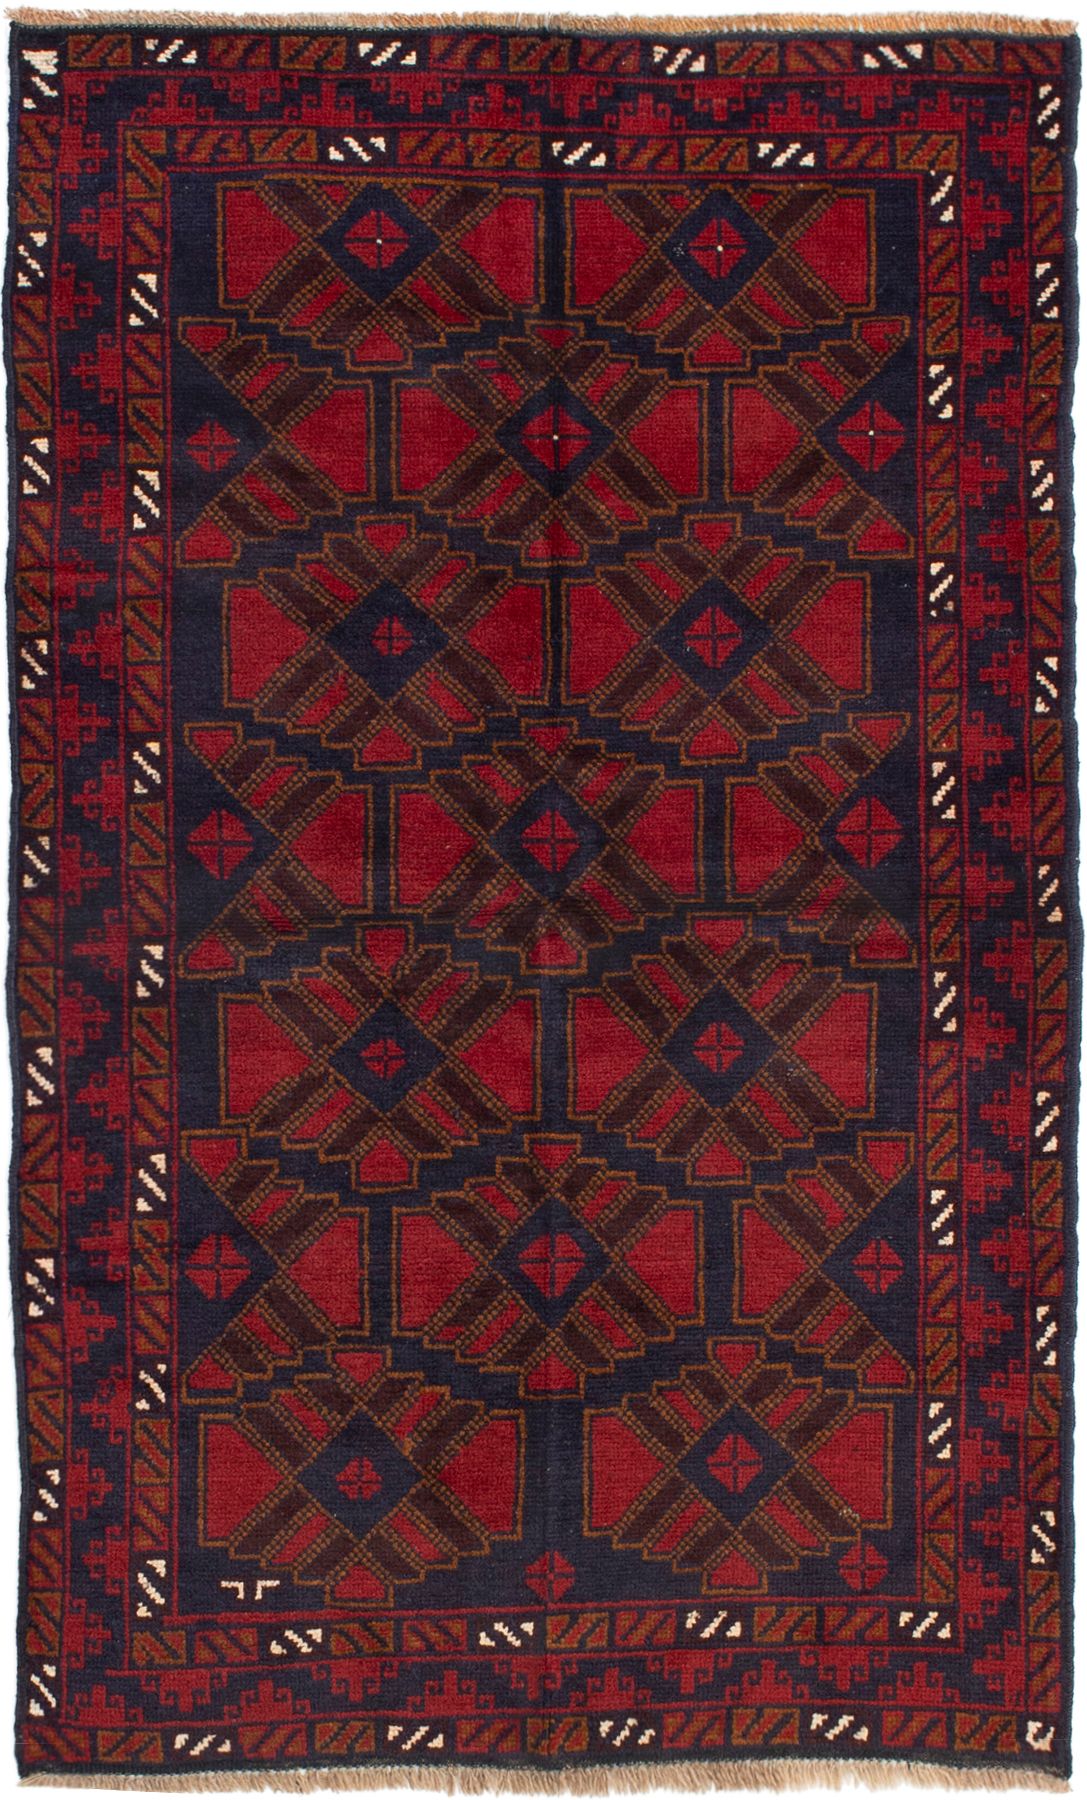 Hand-knotted Teimani Dark Navy, Red Wool Rug 3'6" x 5'10" Size: 3'6" x 5'10"  